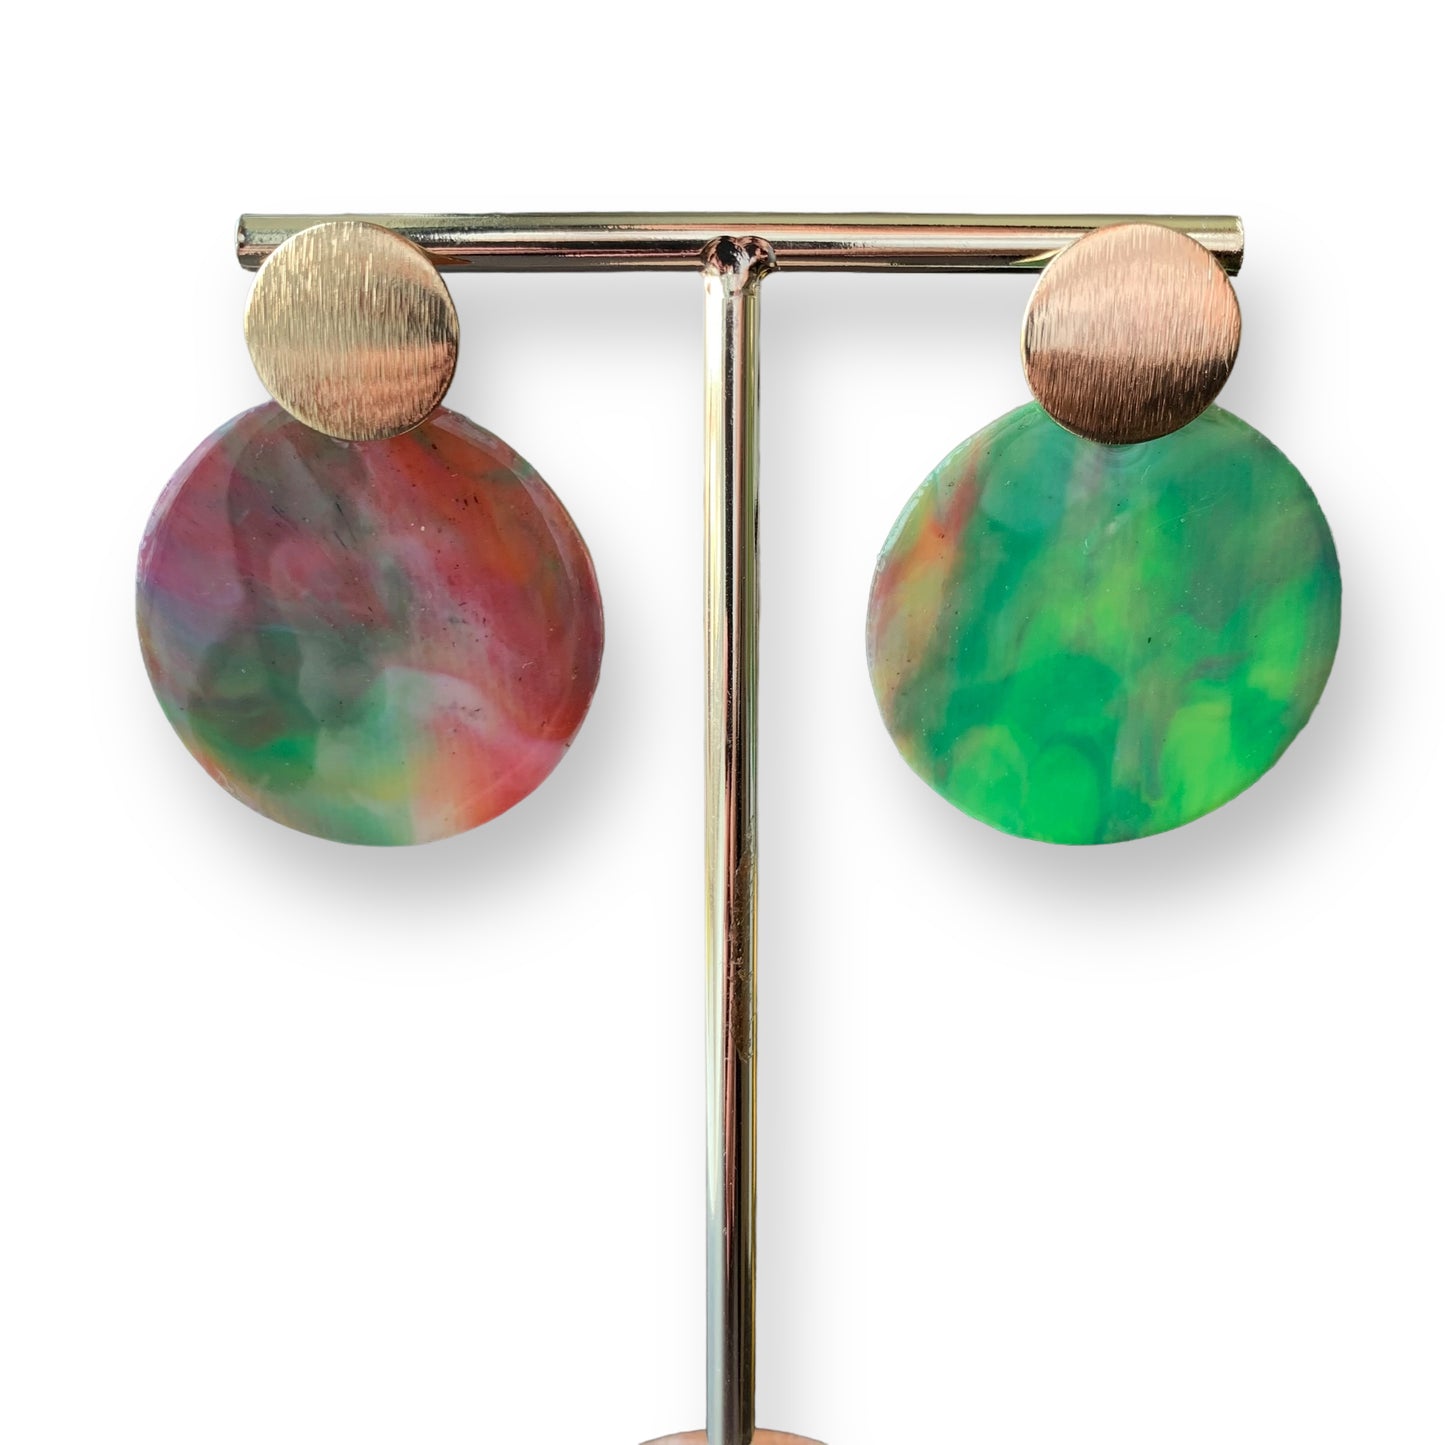 Handmade earrings from recycled bottle tops red green gold studs Recycled plastic jewellery & artwork handmade in London